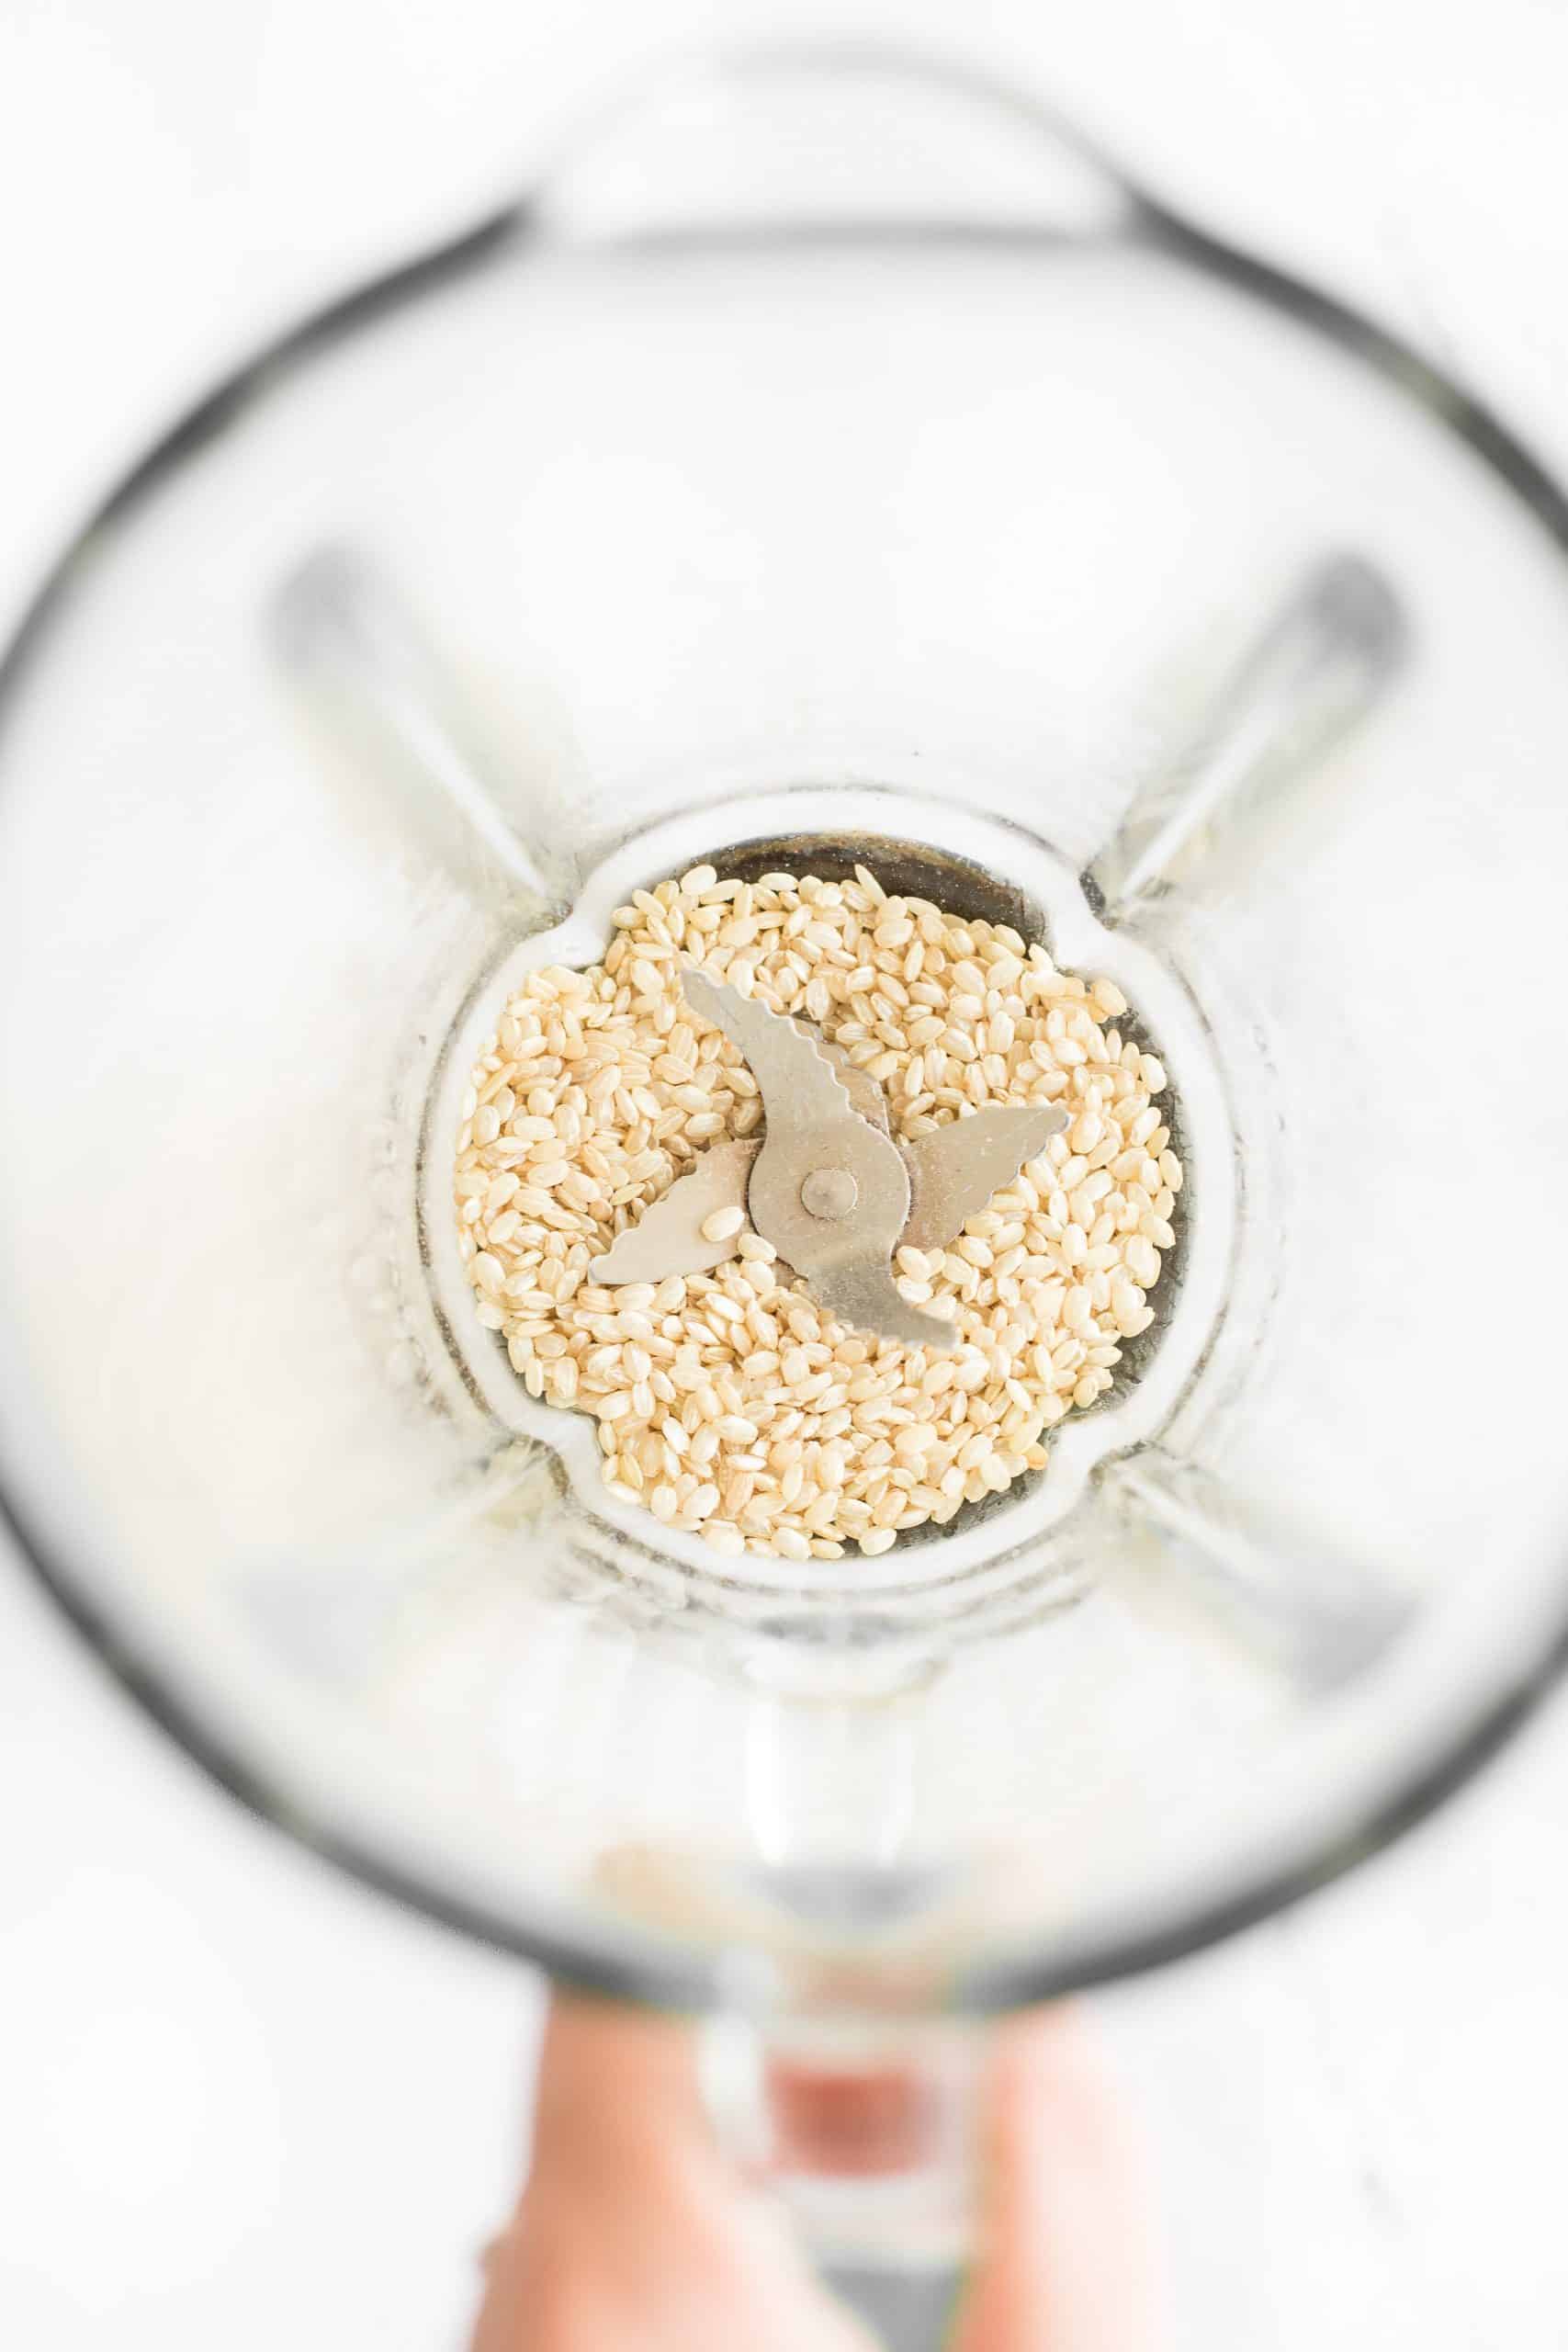 Uncooked brown rice grains in a high-speed blender before being processed.